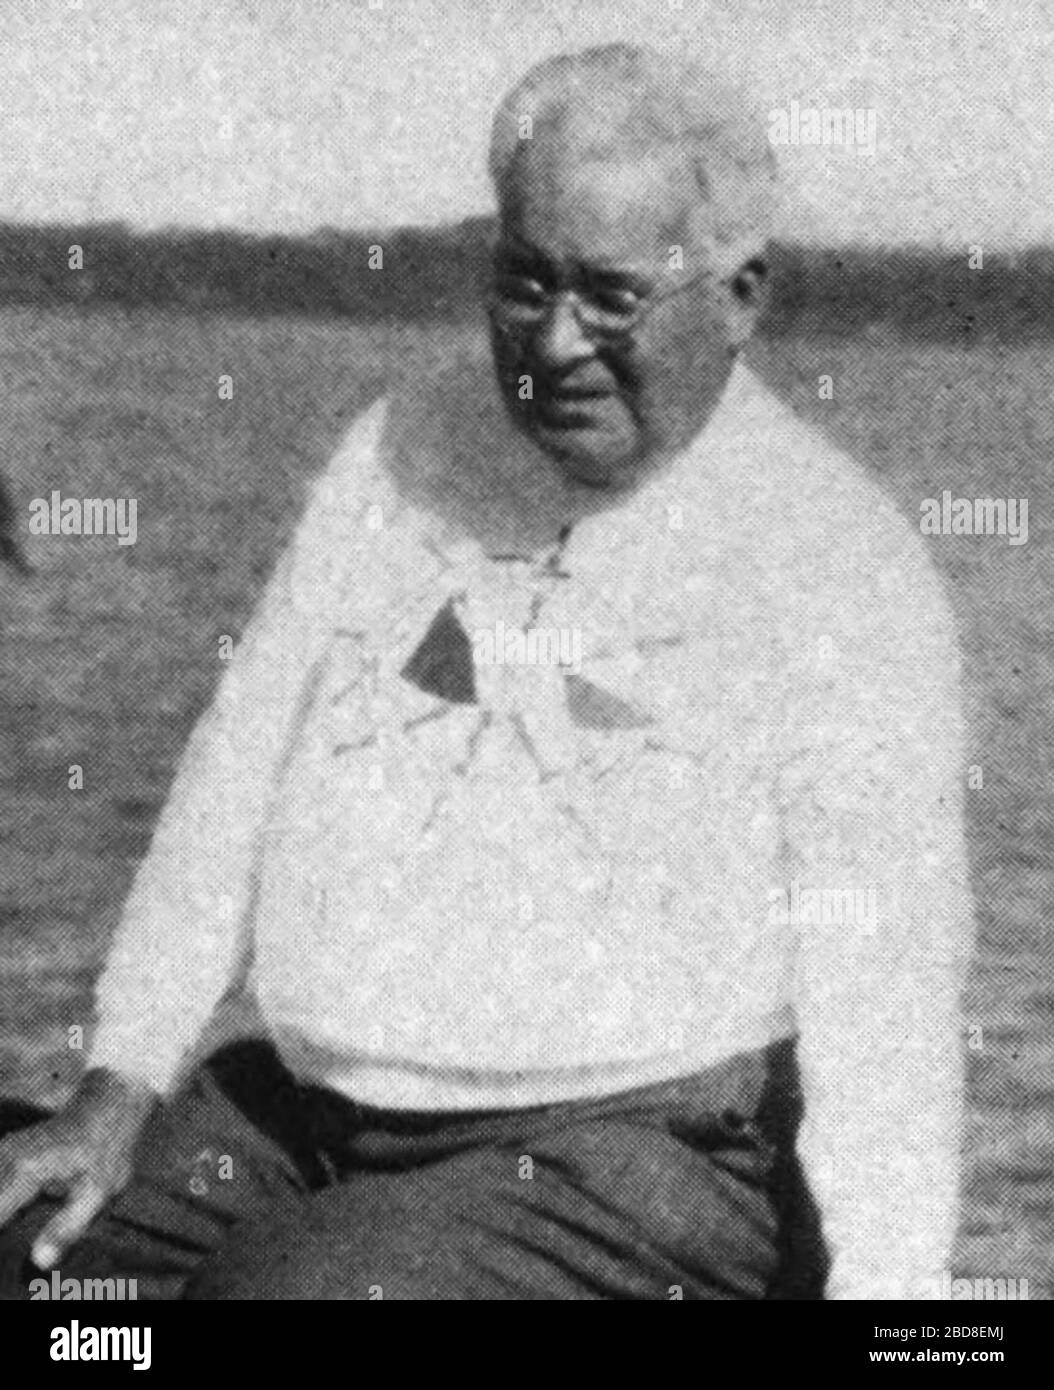 'English: American novelist and editor Sidney Walter Dean (1871–1952), sailing in Quebec. Dean took up boating at the age of 70 (source).; between circa 1940 and circa 1950 date QS:P,+1950-00-00T00:00:00Z/7,P1319,+1940-00-00T00:00:00Z/9,P1326,+1950-00-00T00:00:00Z/9,P1480,Q5727902; Sidney W. Dean and Marguerite Mooers Marshall (1950)       We Fell in Love with Quebec, Philadelphia:  The Curtis Publishing Company    https://hdl.handle.net/2027/uc1.$b729537; Joseph Belleau; ' Stock Photo